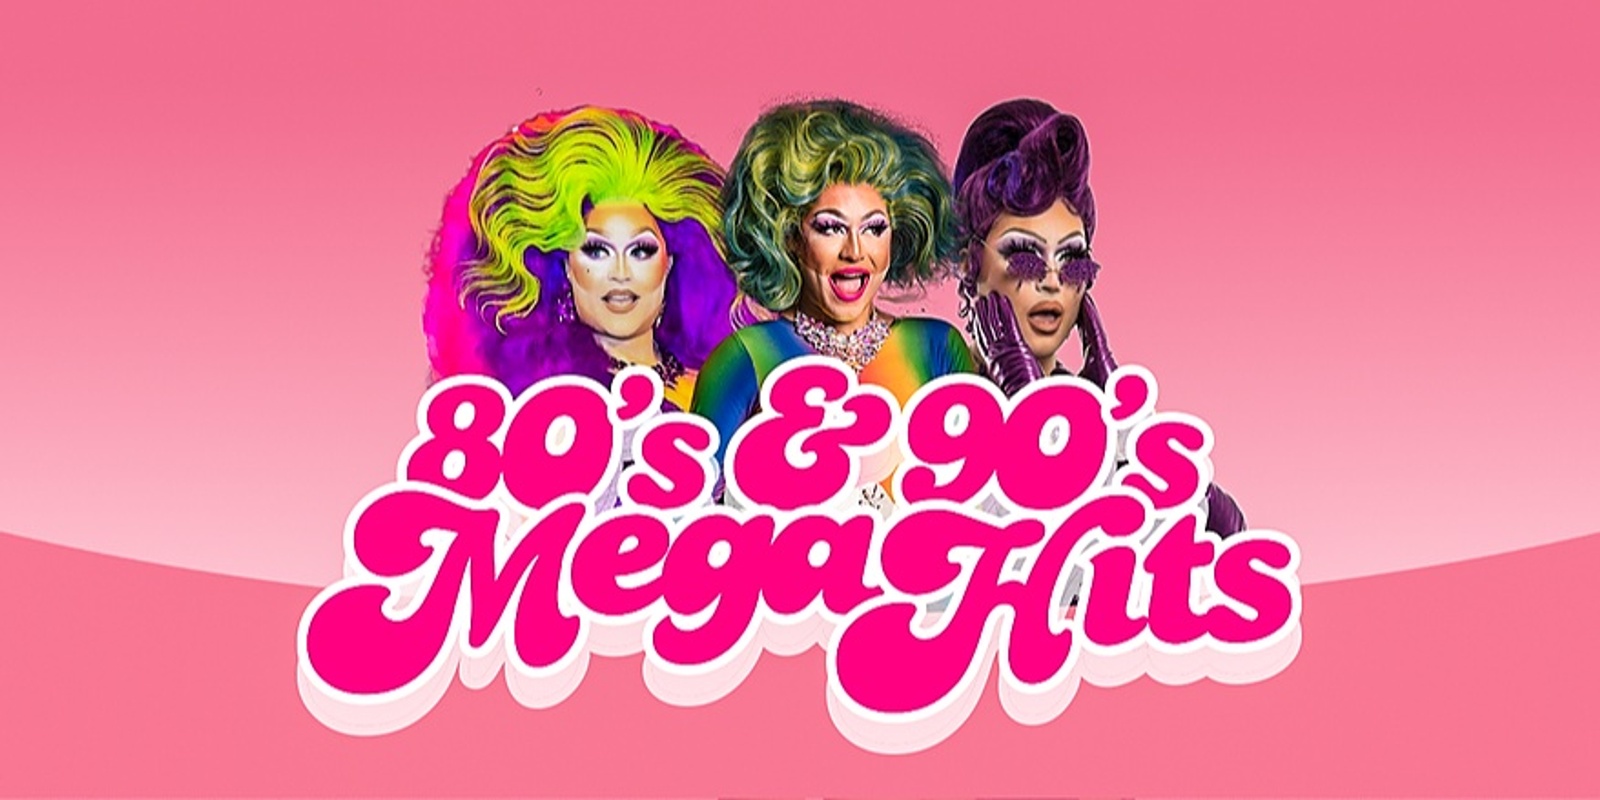 Banner image for 80s & 90s Drag Queen Show - Port Macquarie 